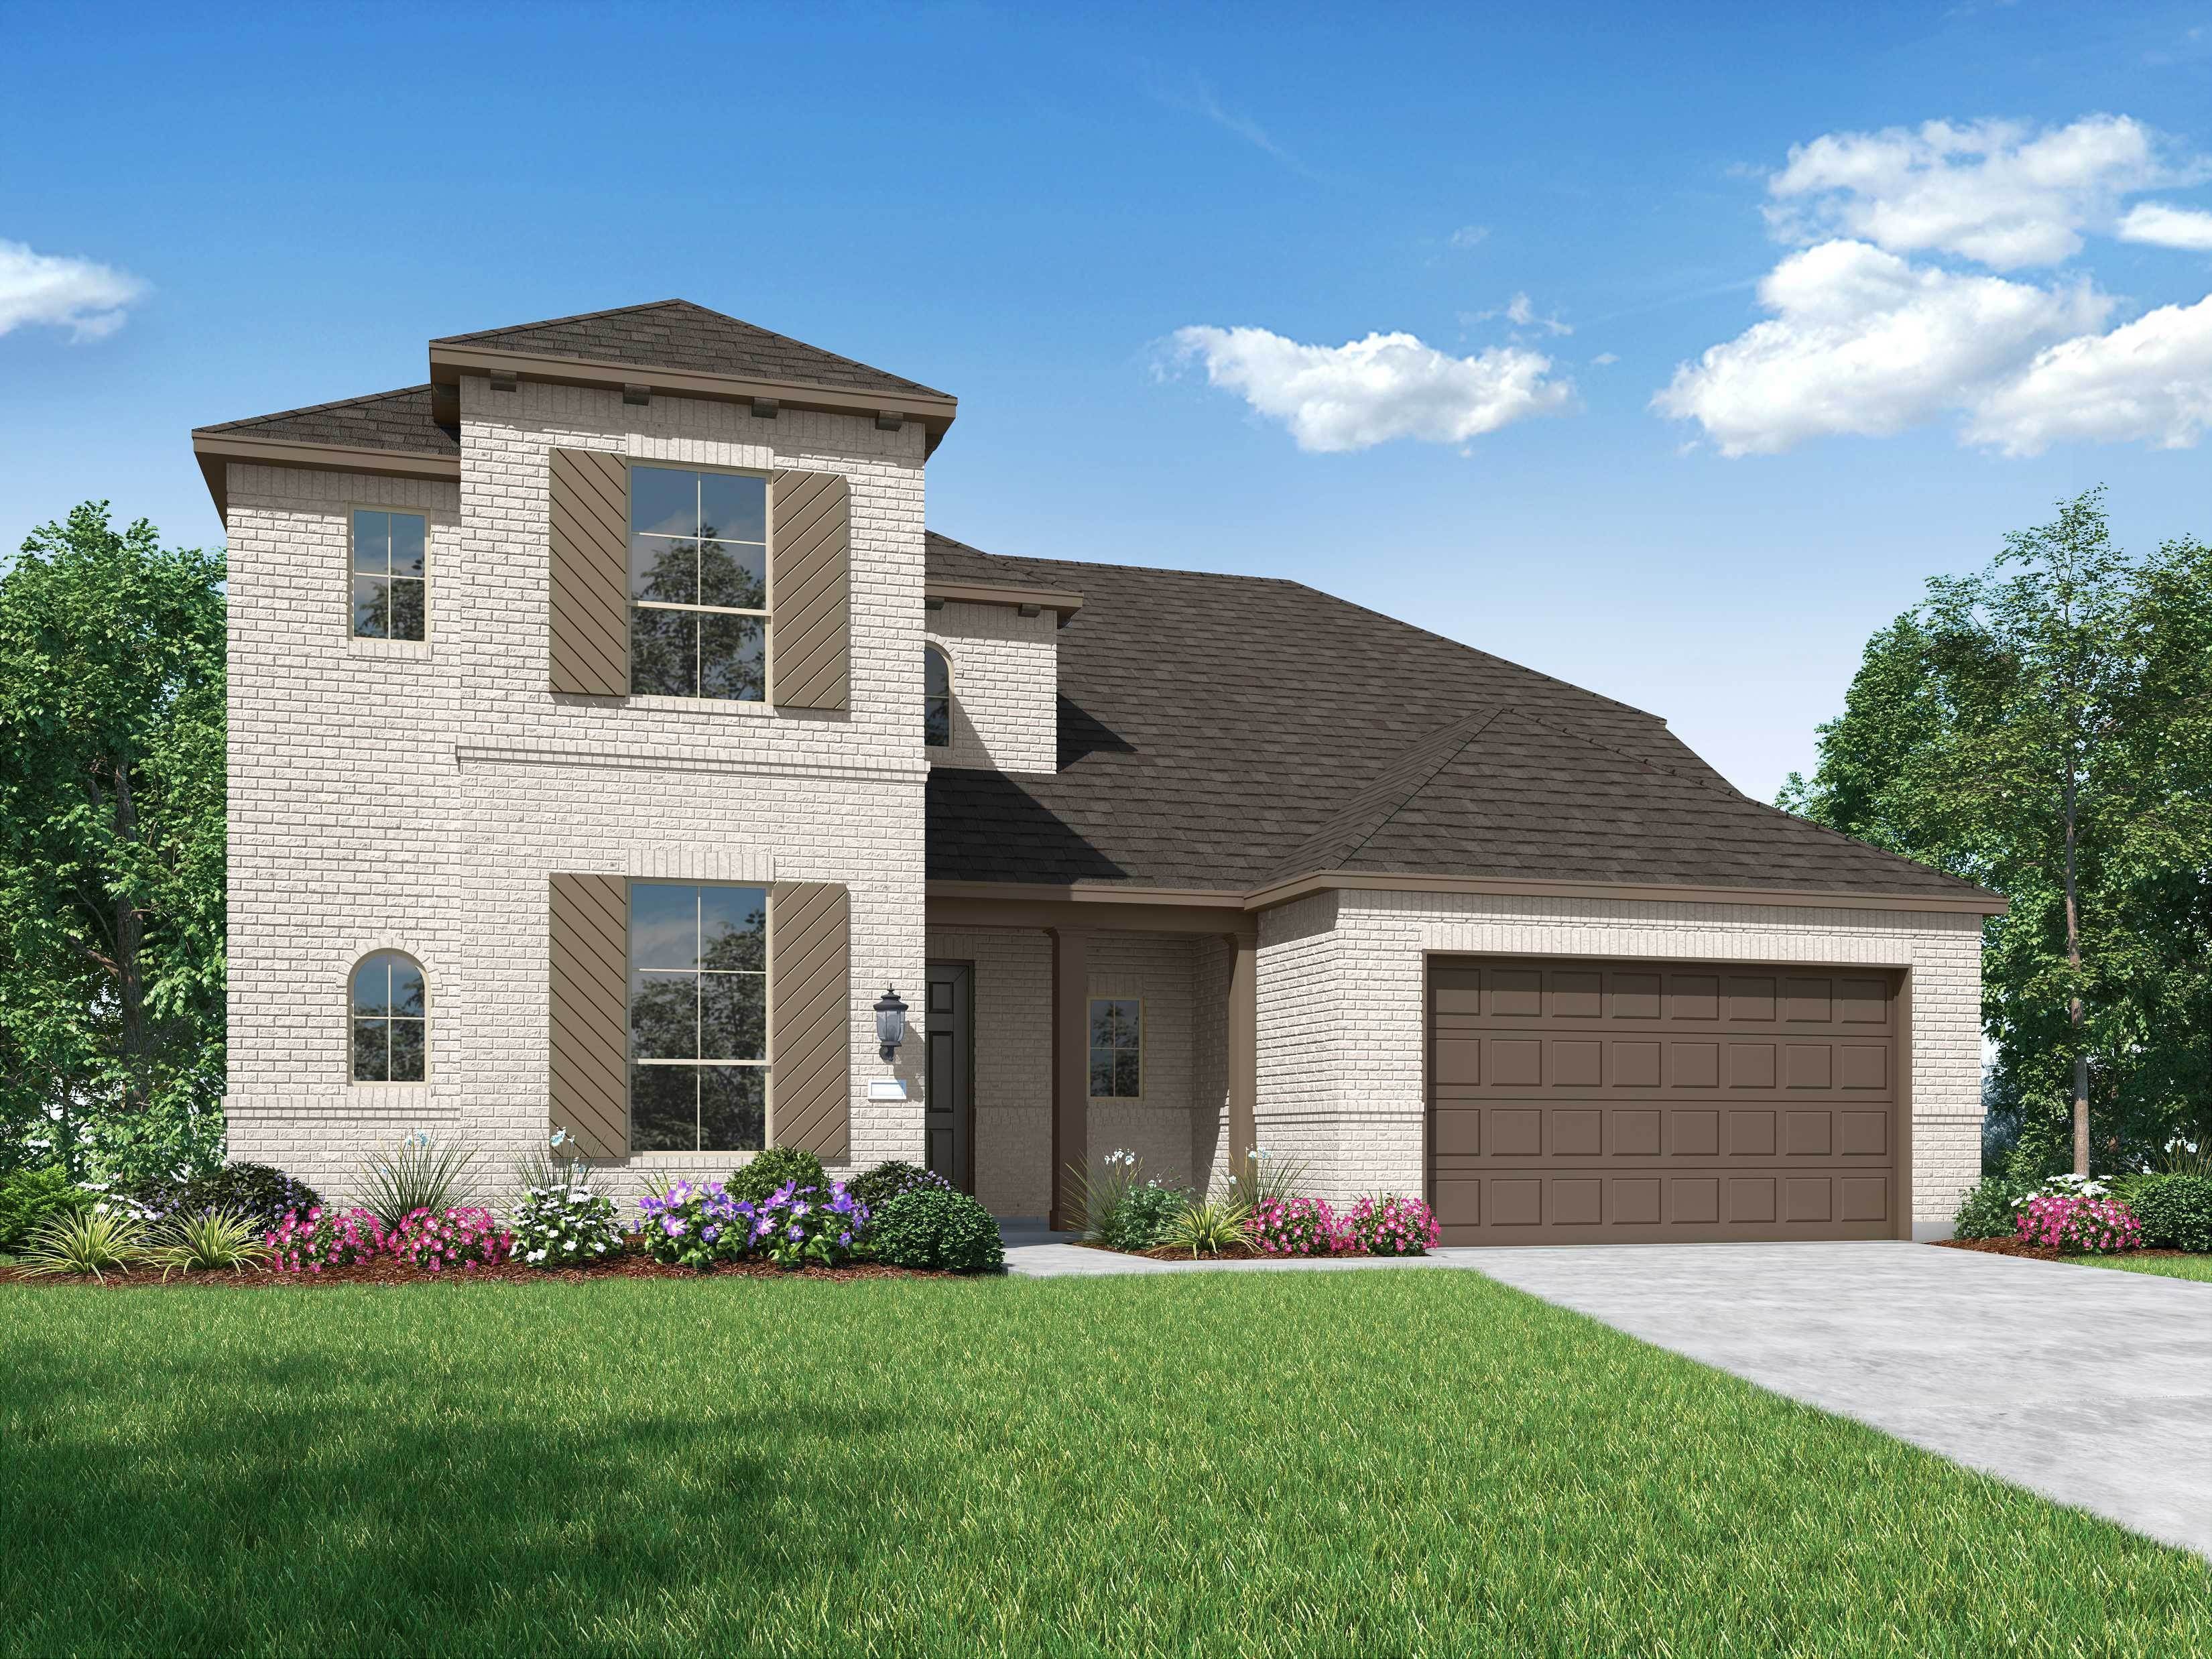 Single Family for Sale at Monterra: 70ft. Lots Fate, TX 75087